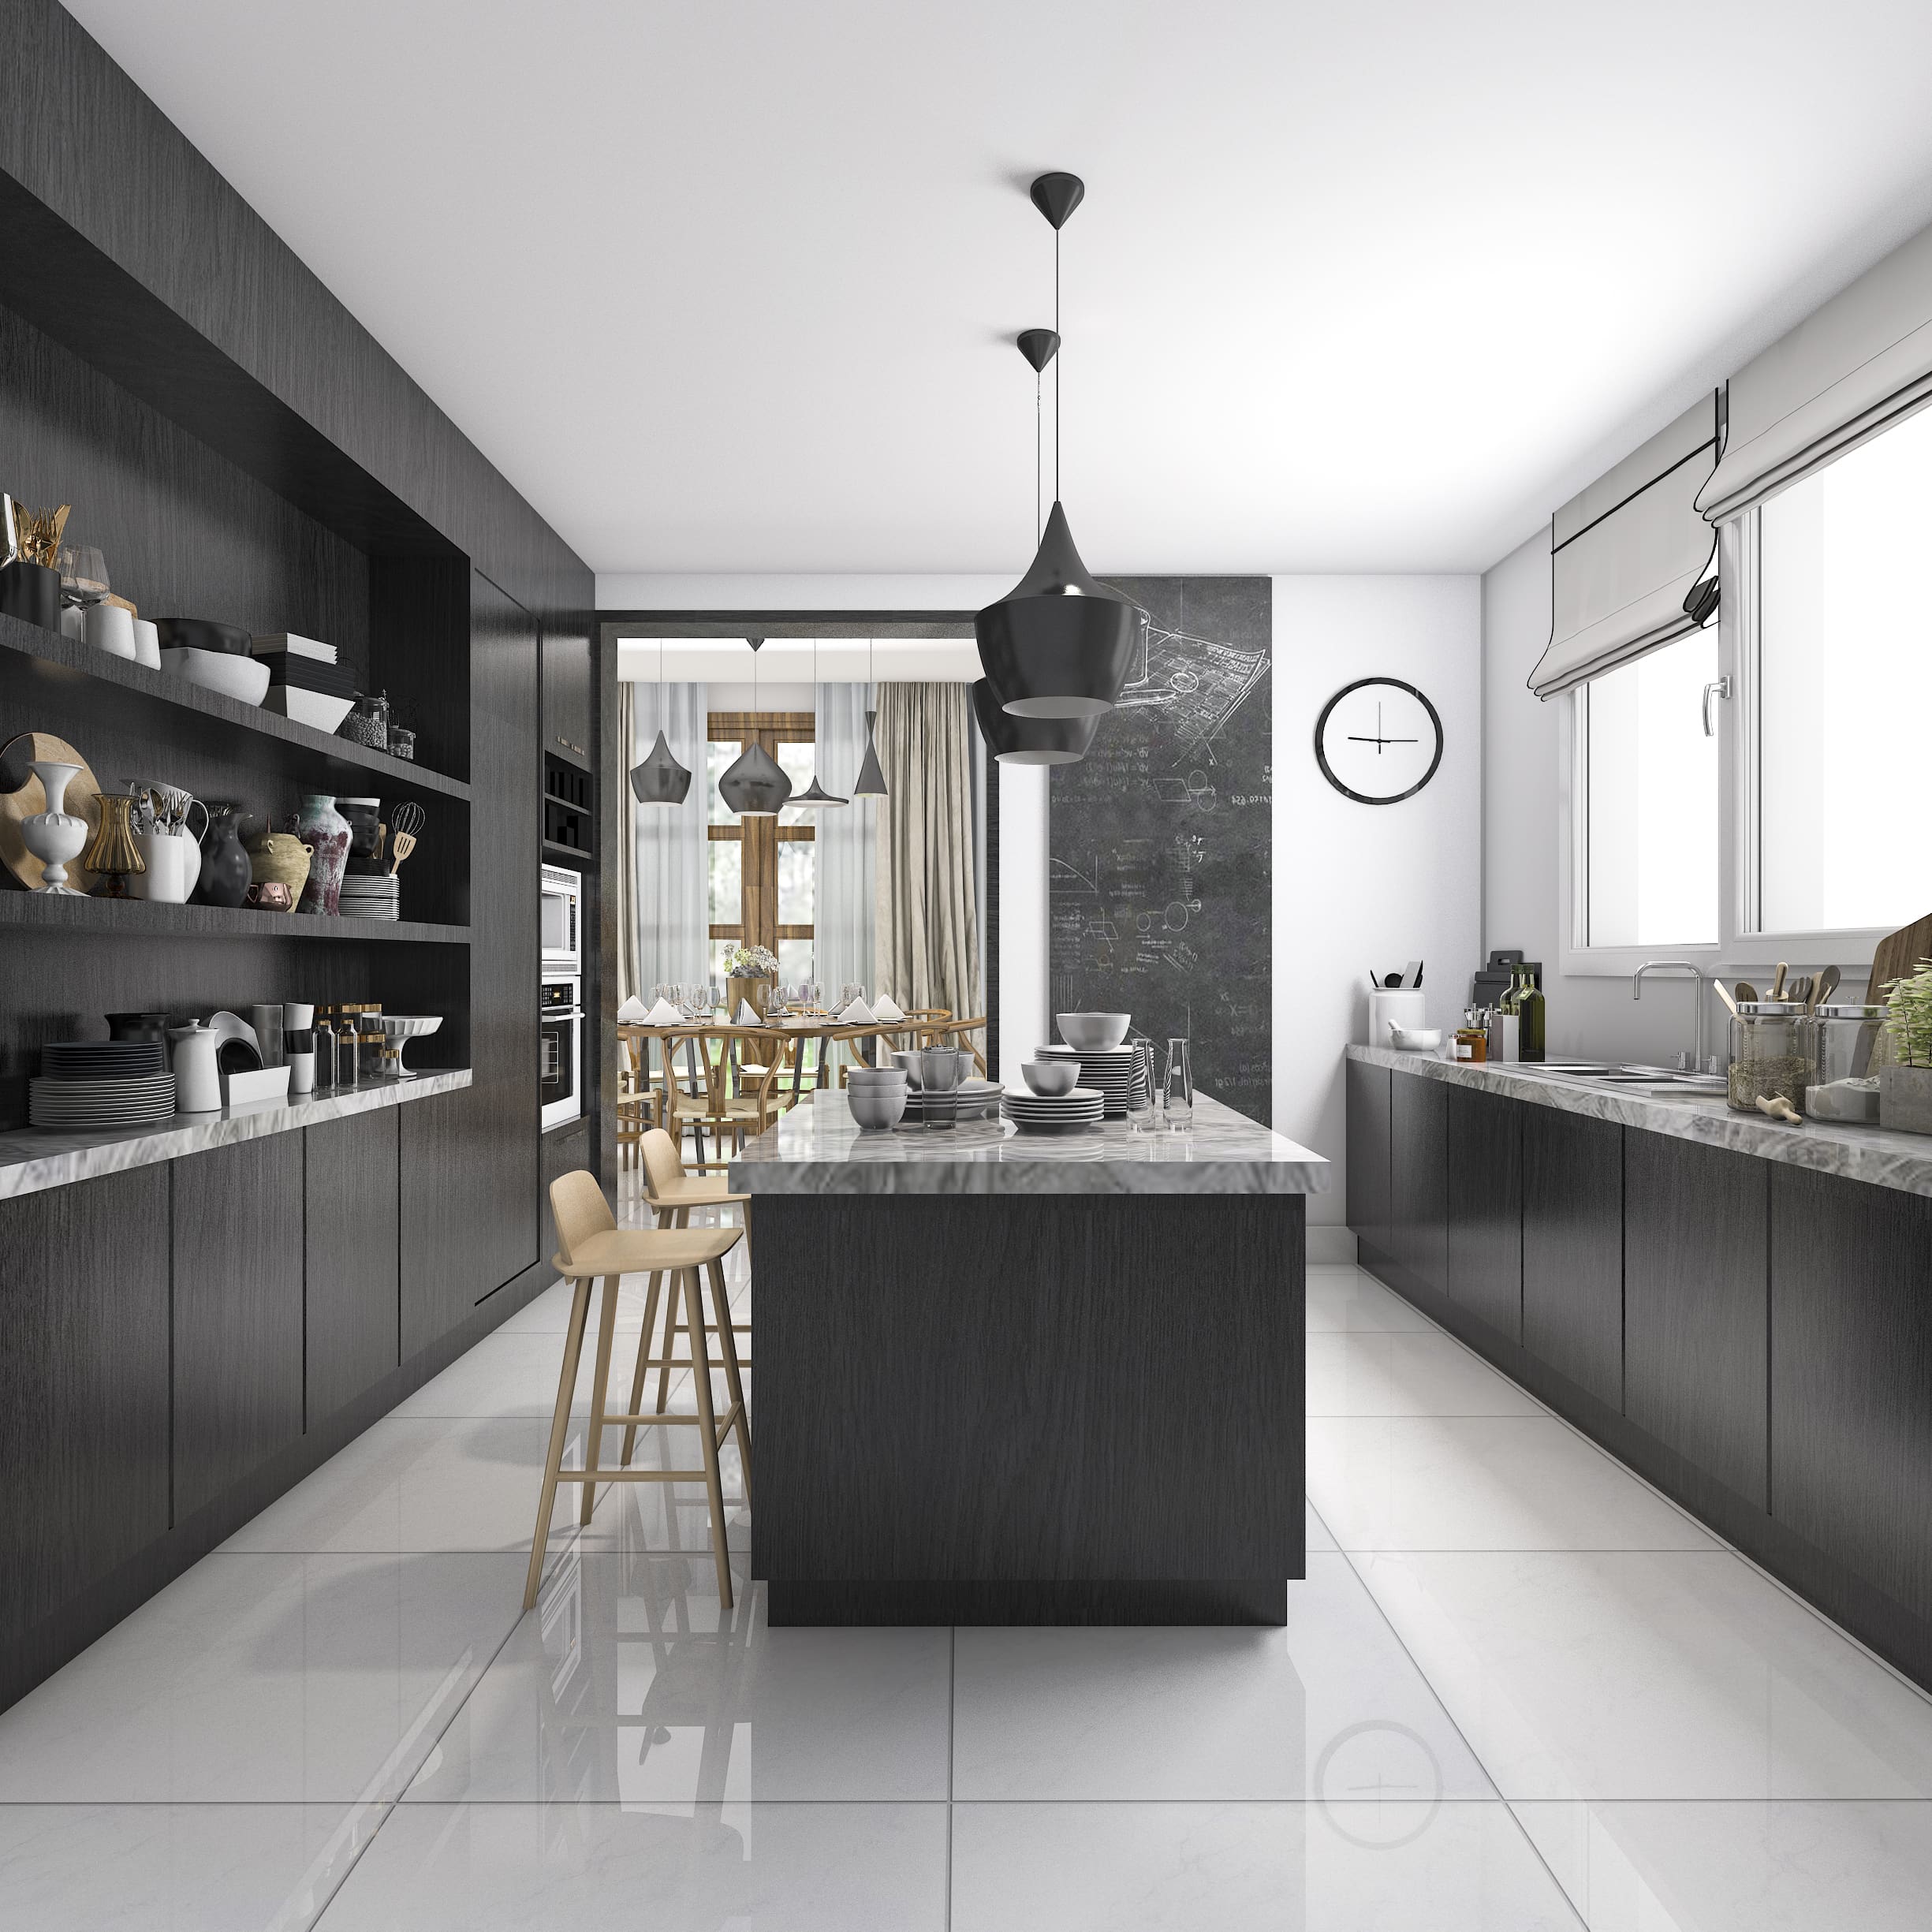 How to Stage a Kitchen When Selling Your Home